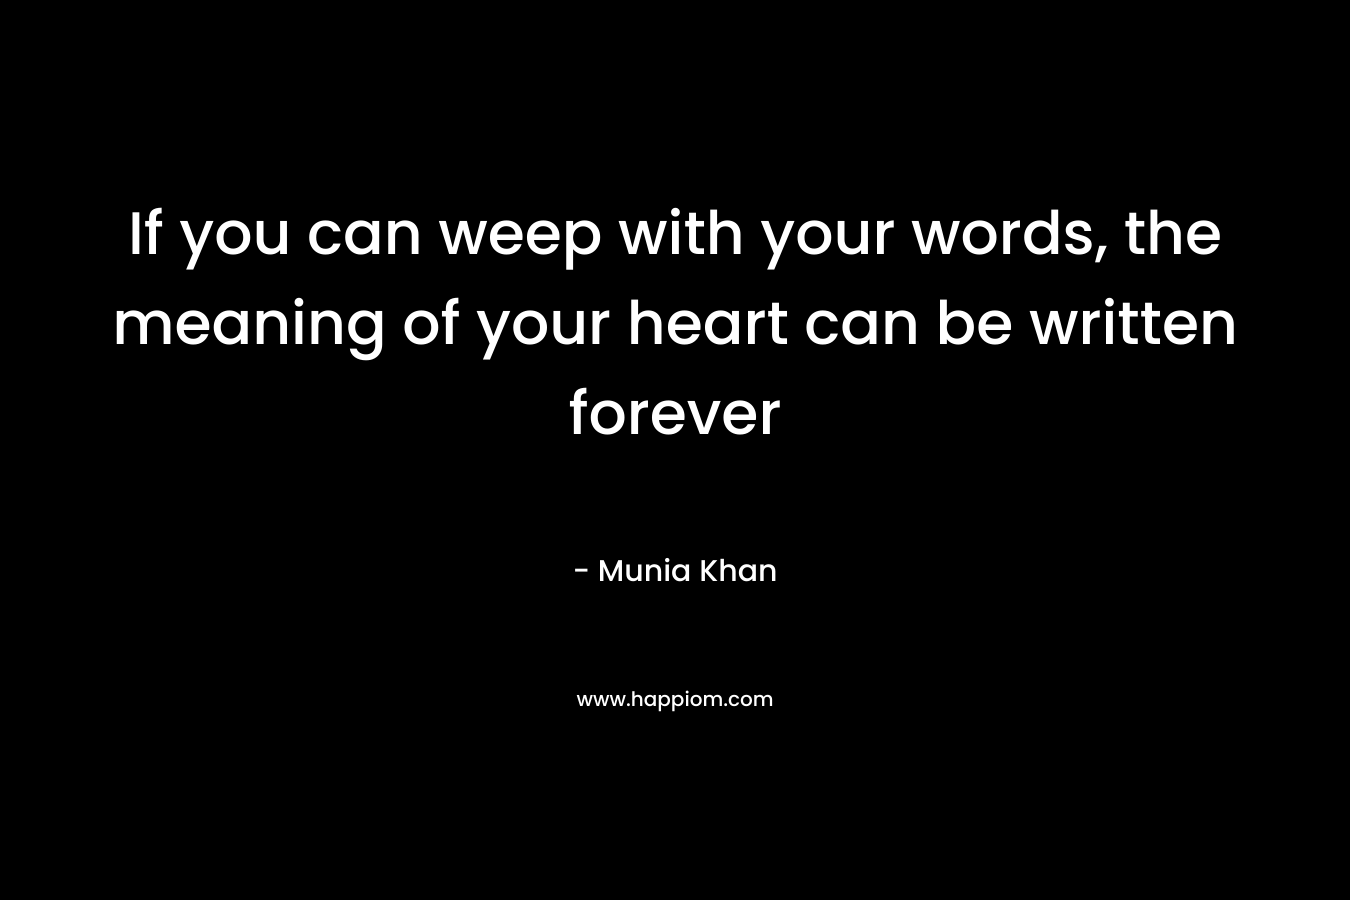 If you can weep with your words, the meaning of your heart can be written forever